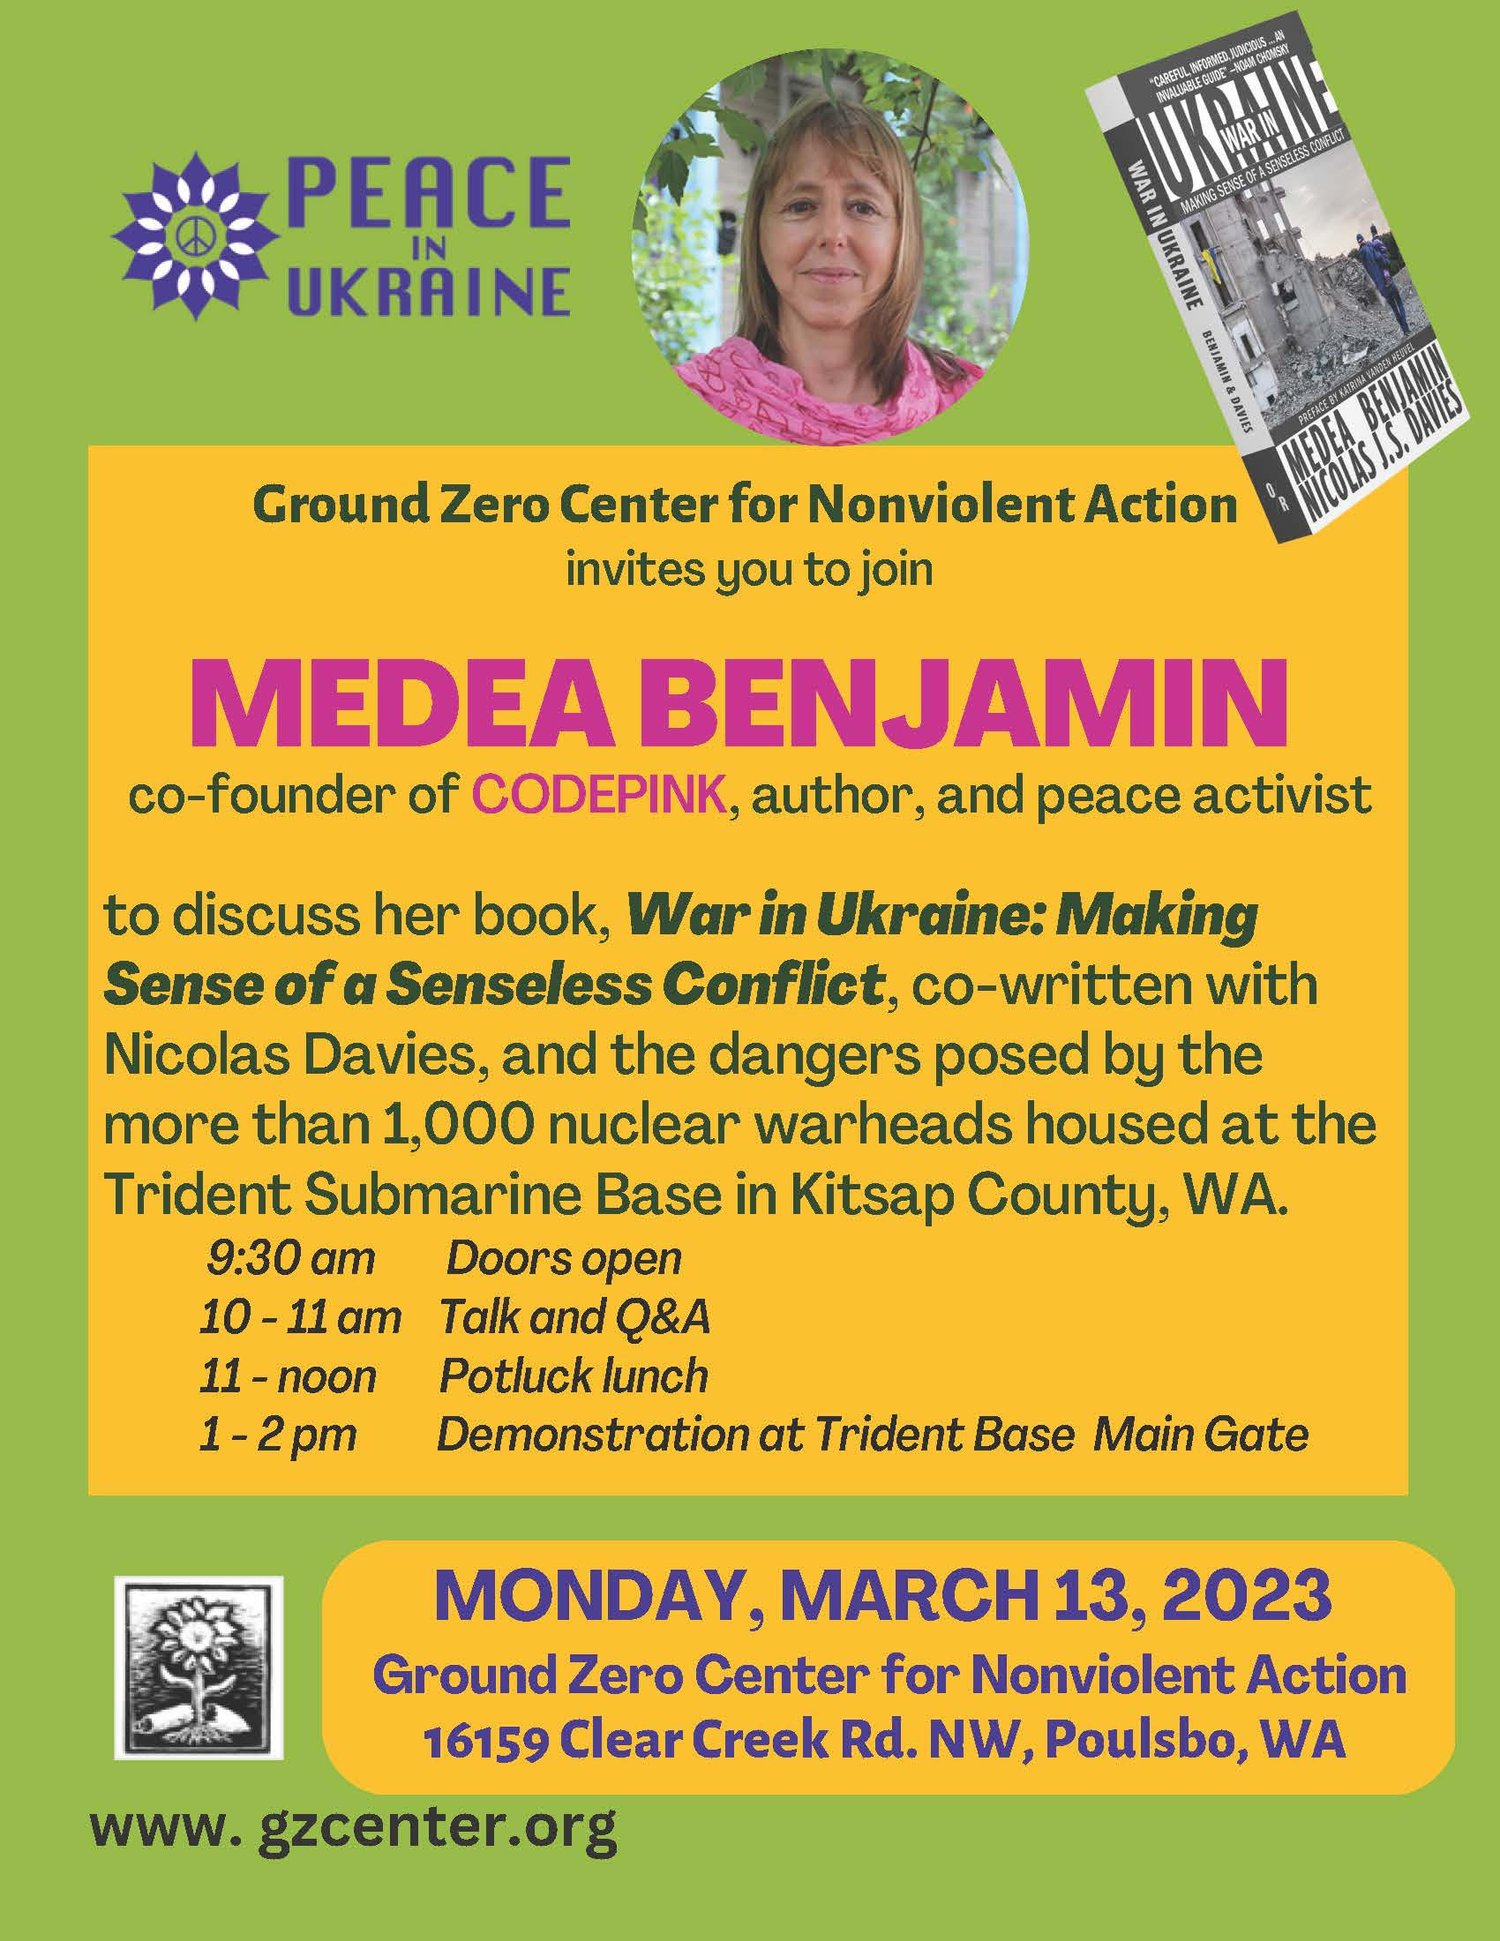 Learn More – Ground Zero Center for Nonviolent Action